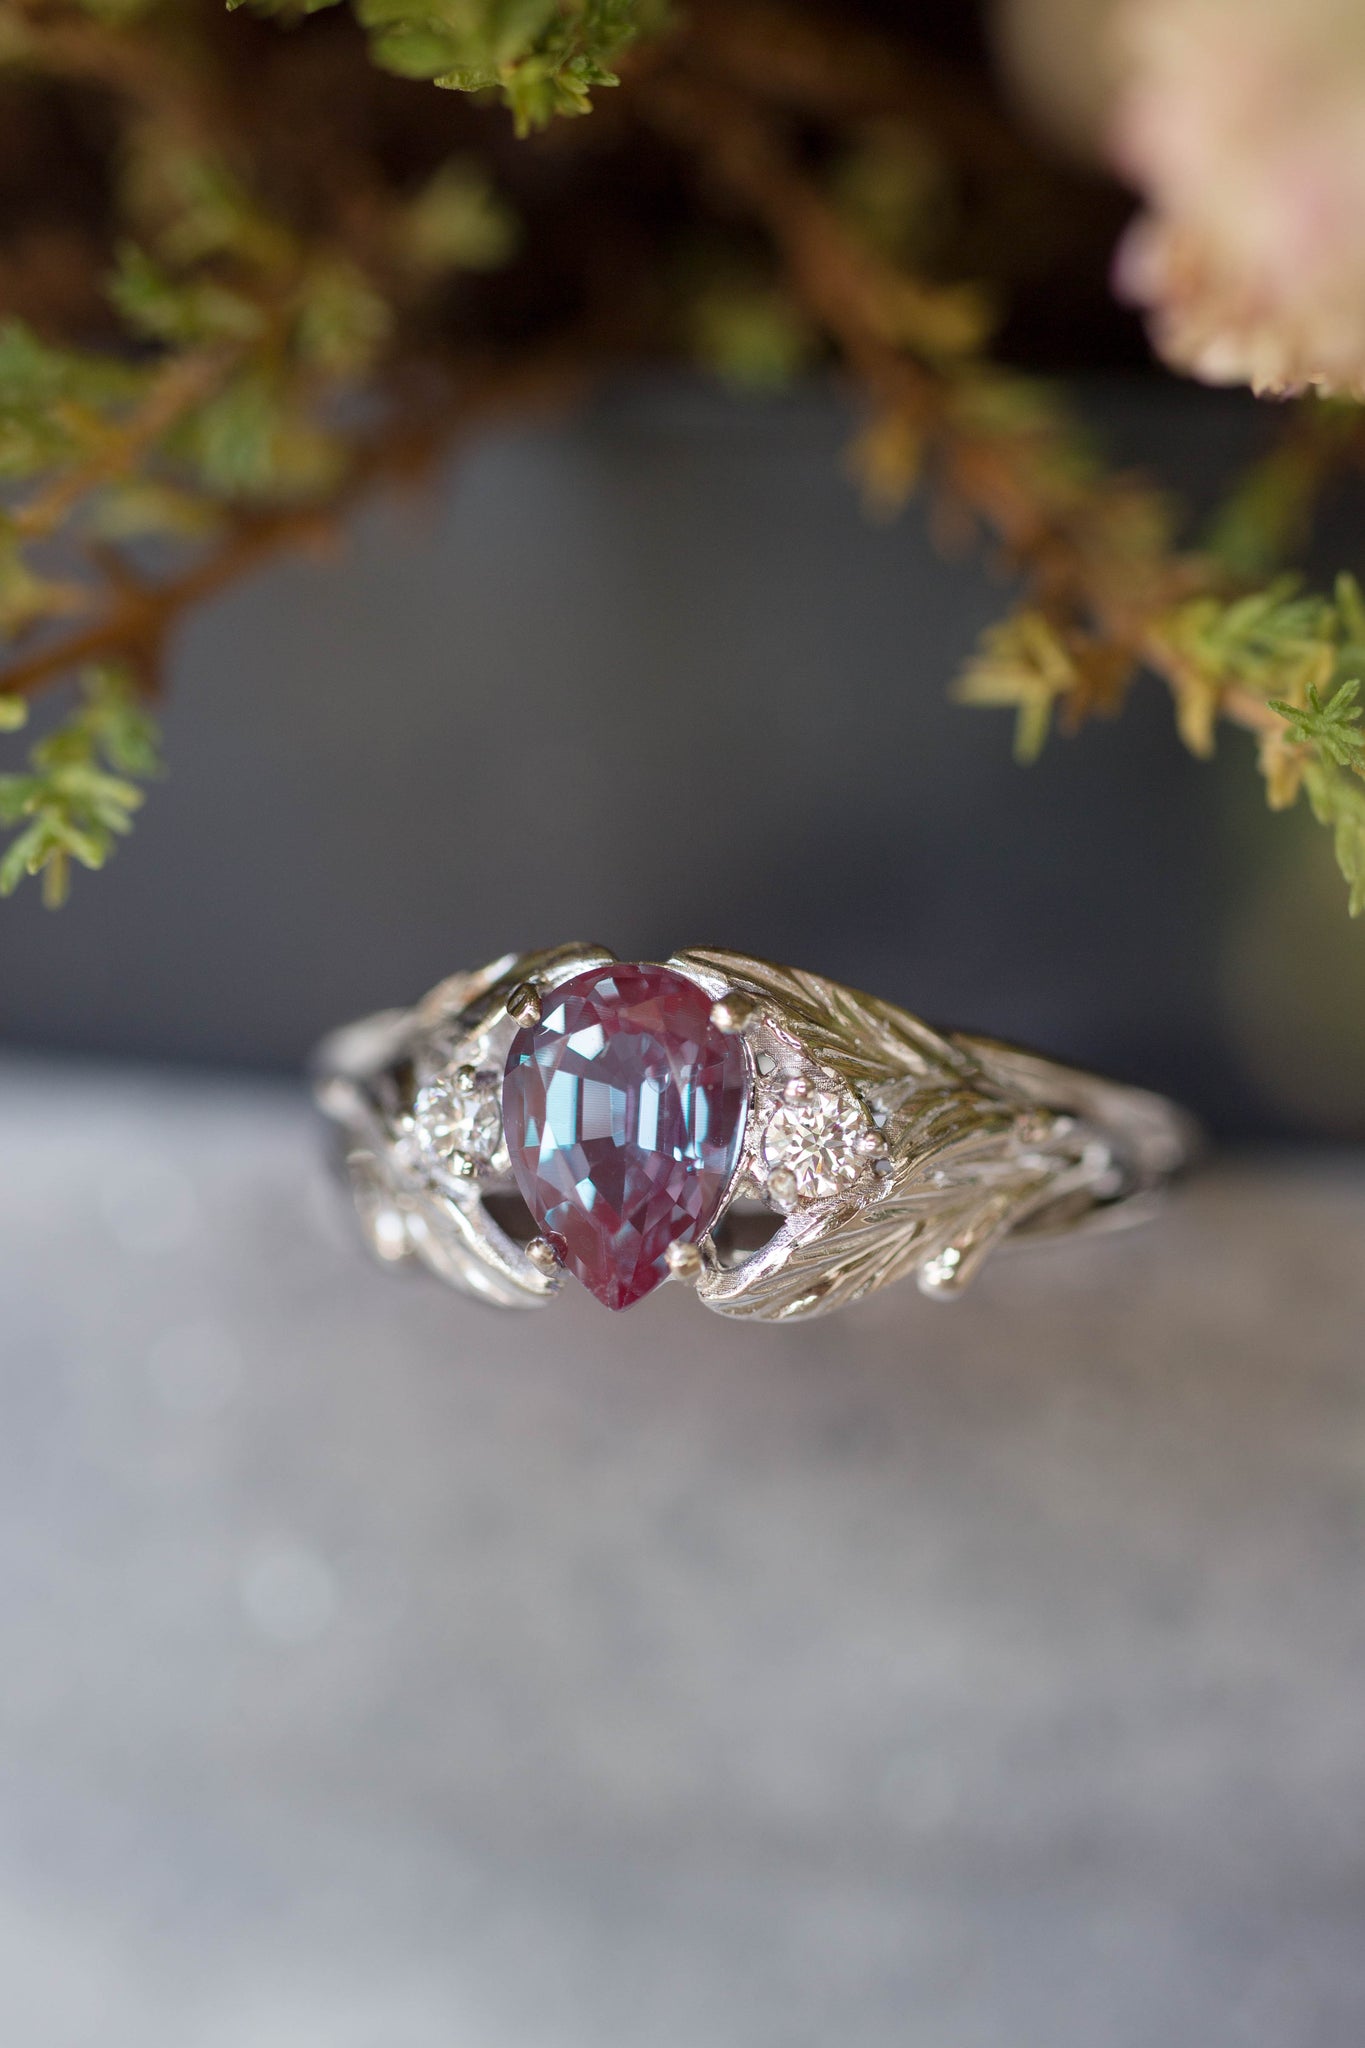 READY TO SHIP: Wisteria in 14K white gold, pear alexandrite 7x5 mm, diamonds, AVAILABLE RING SIZES - 6 US, 8 US - Eden Garden Jewelry™